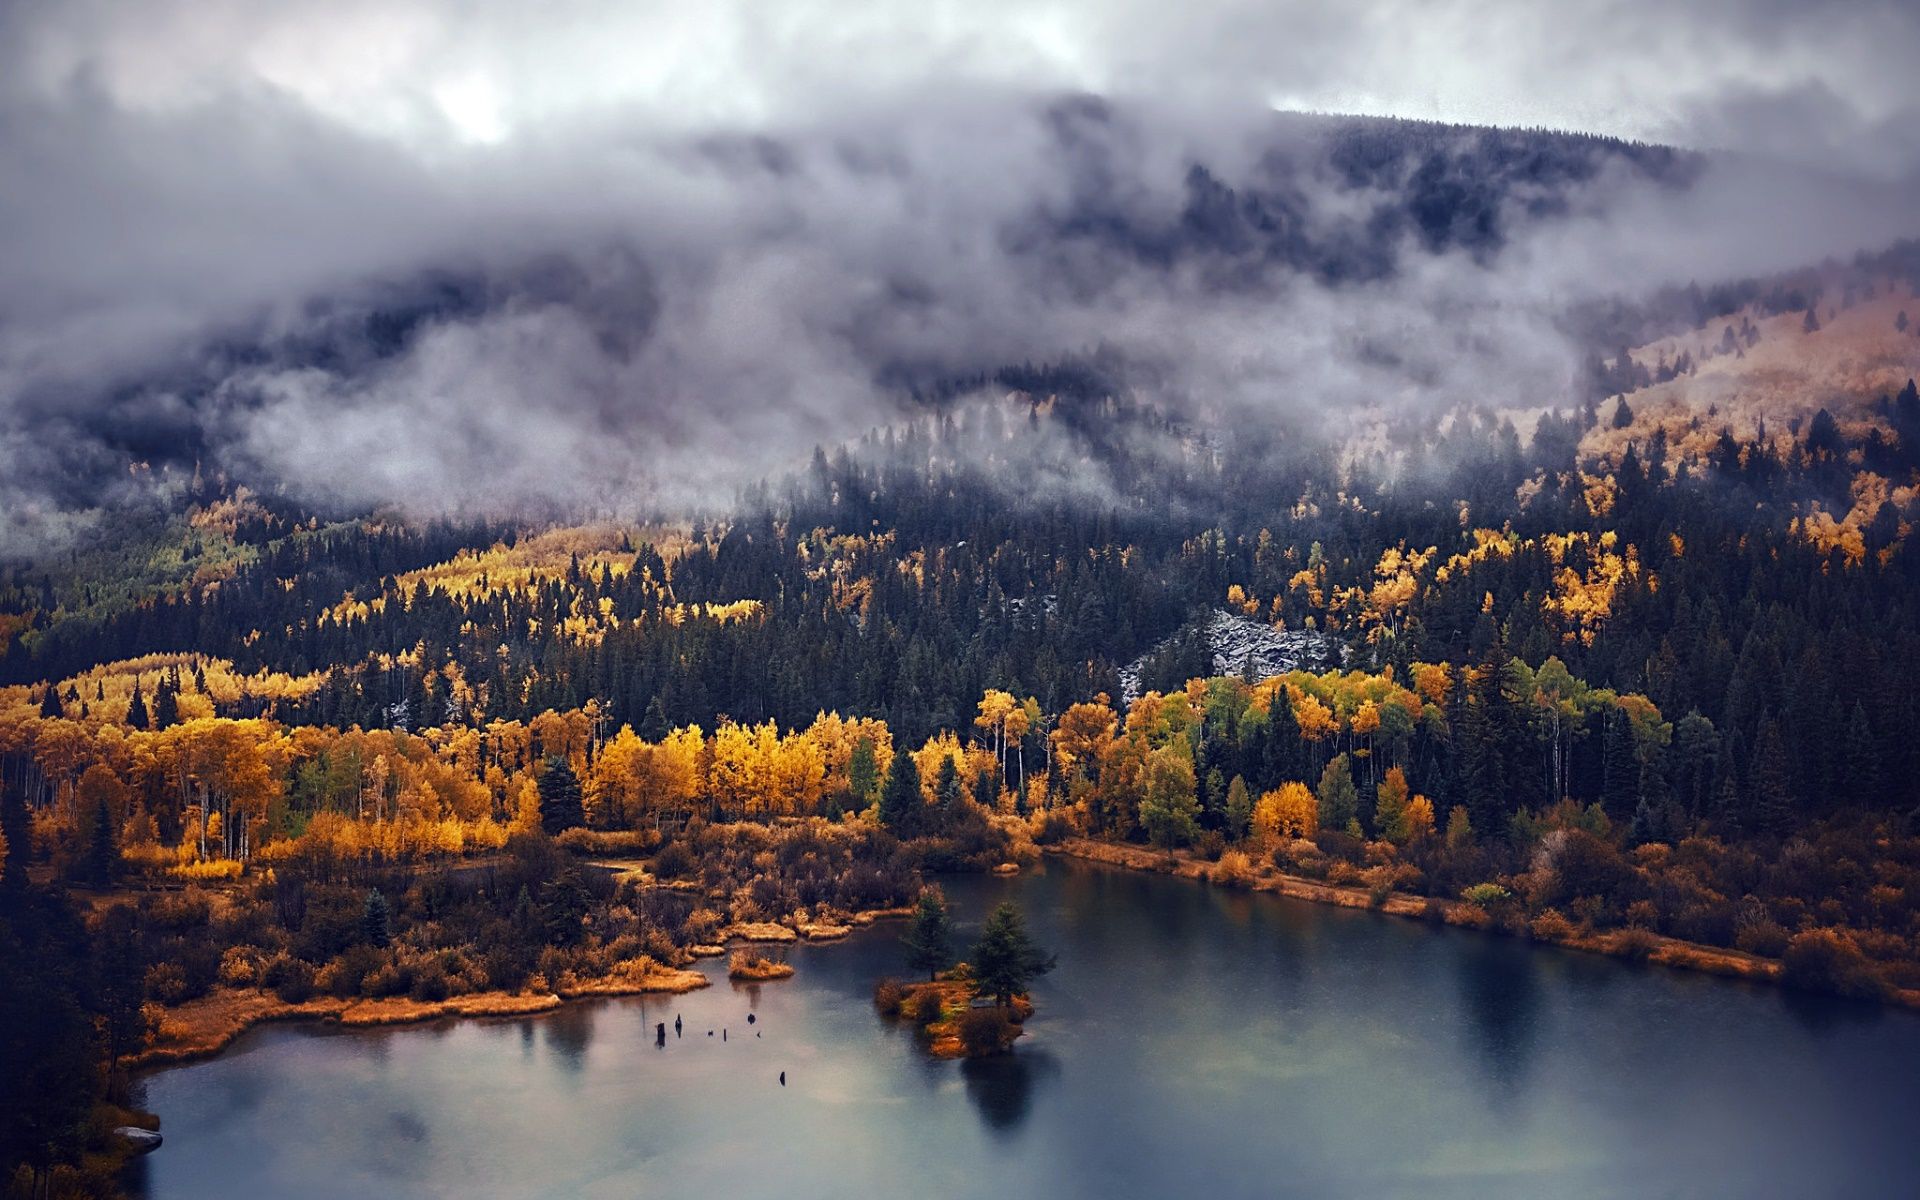 A foggy mountain lake surrounded by trees in the fall. - Lake